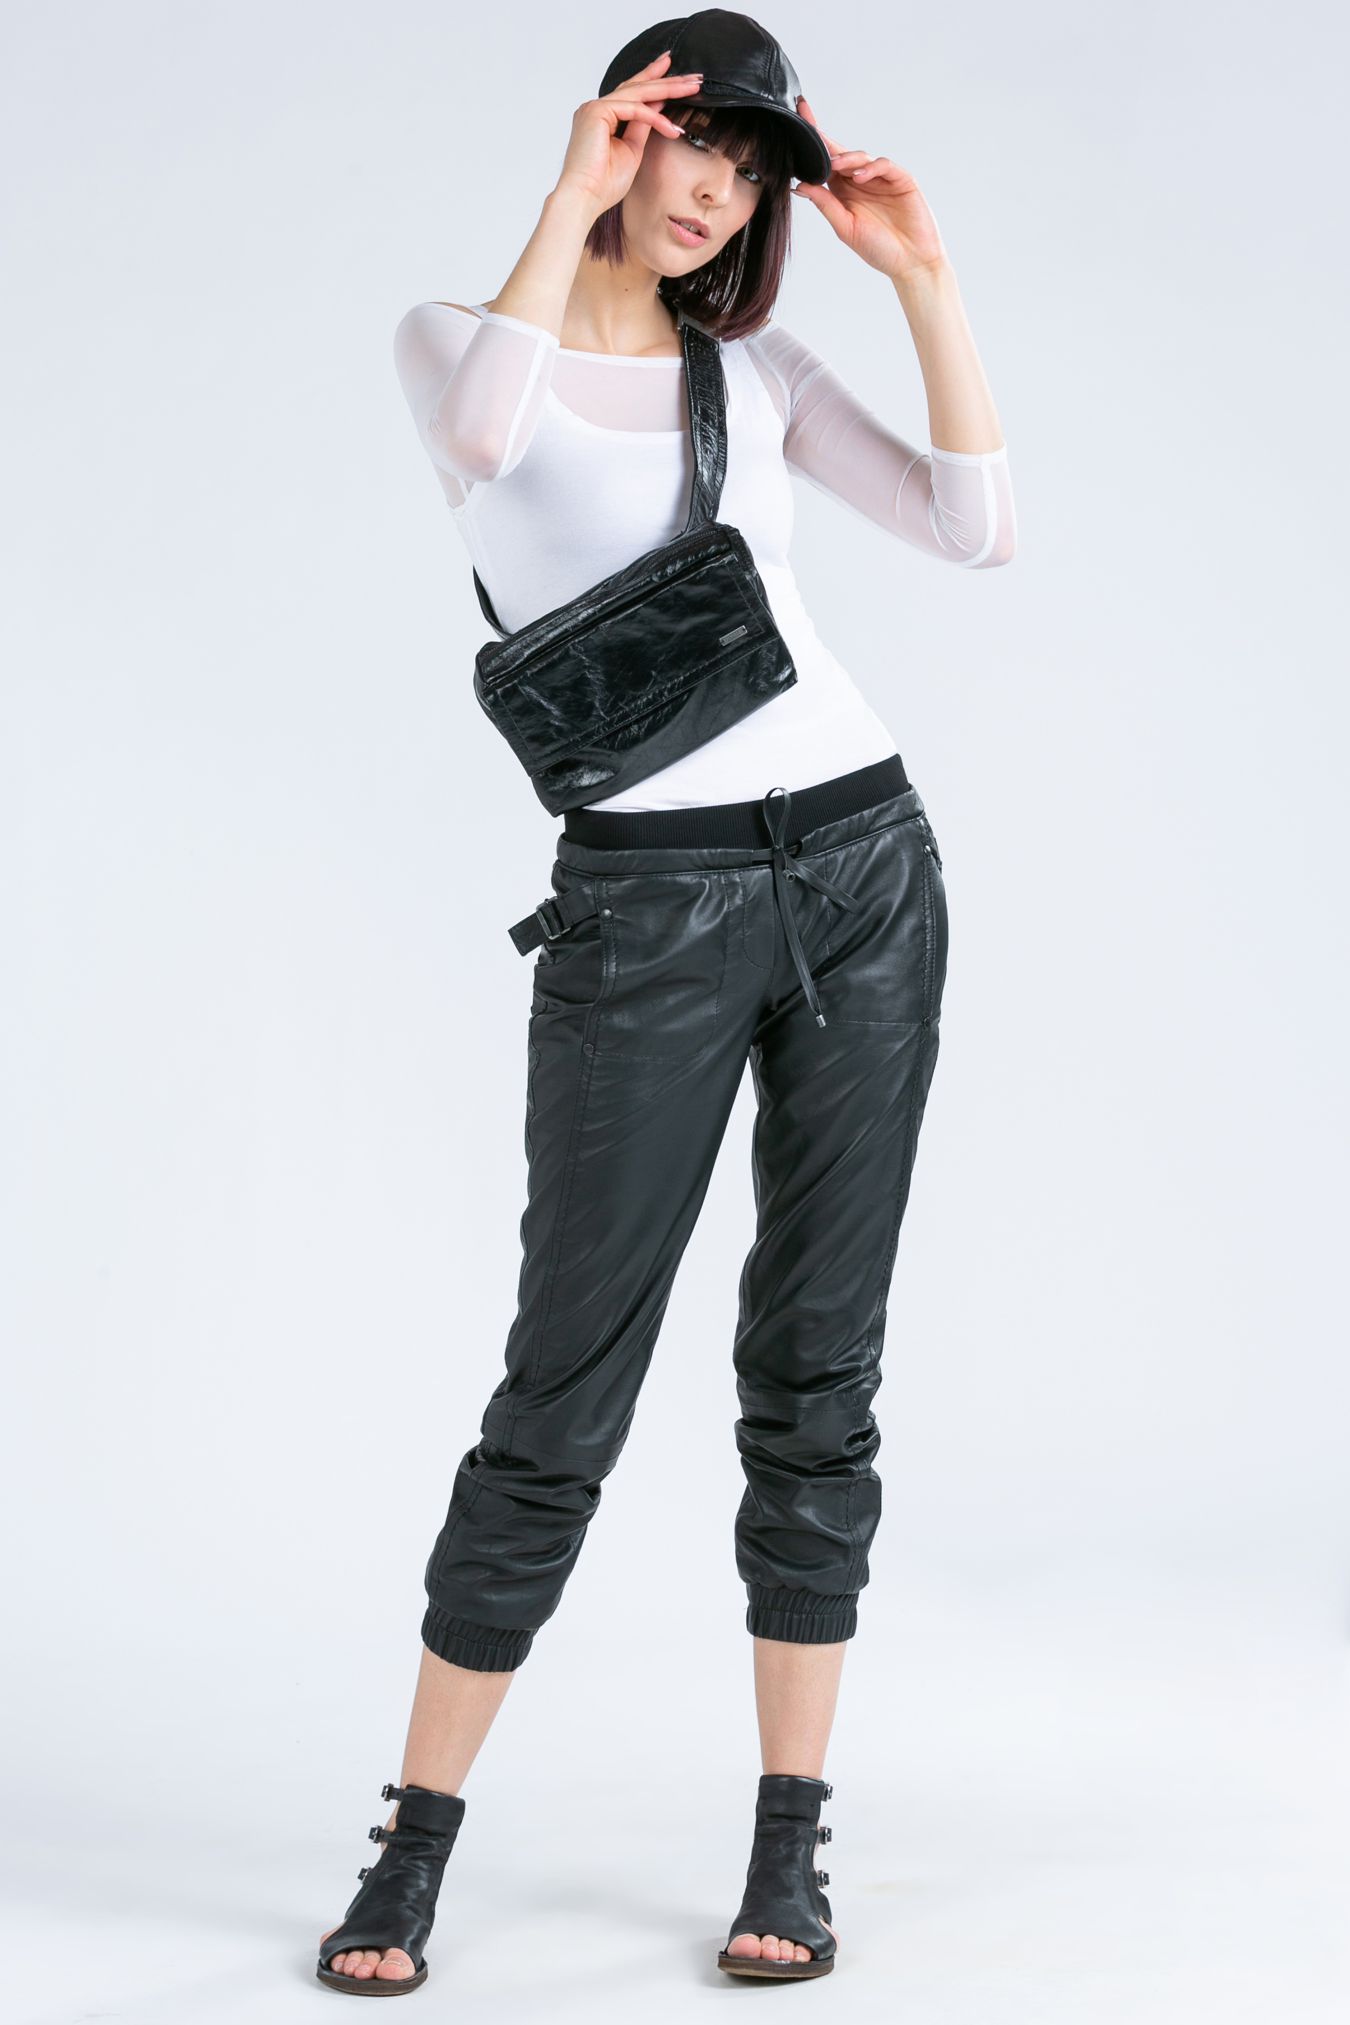 120015 LEATHER PANTS WITH STRAPS BLACK - By Rieske image 2